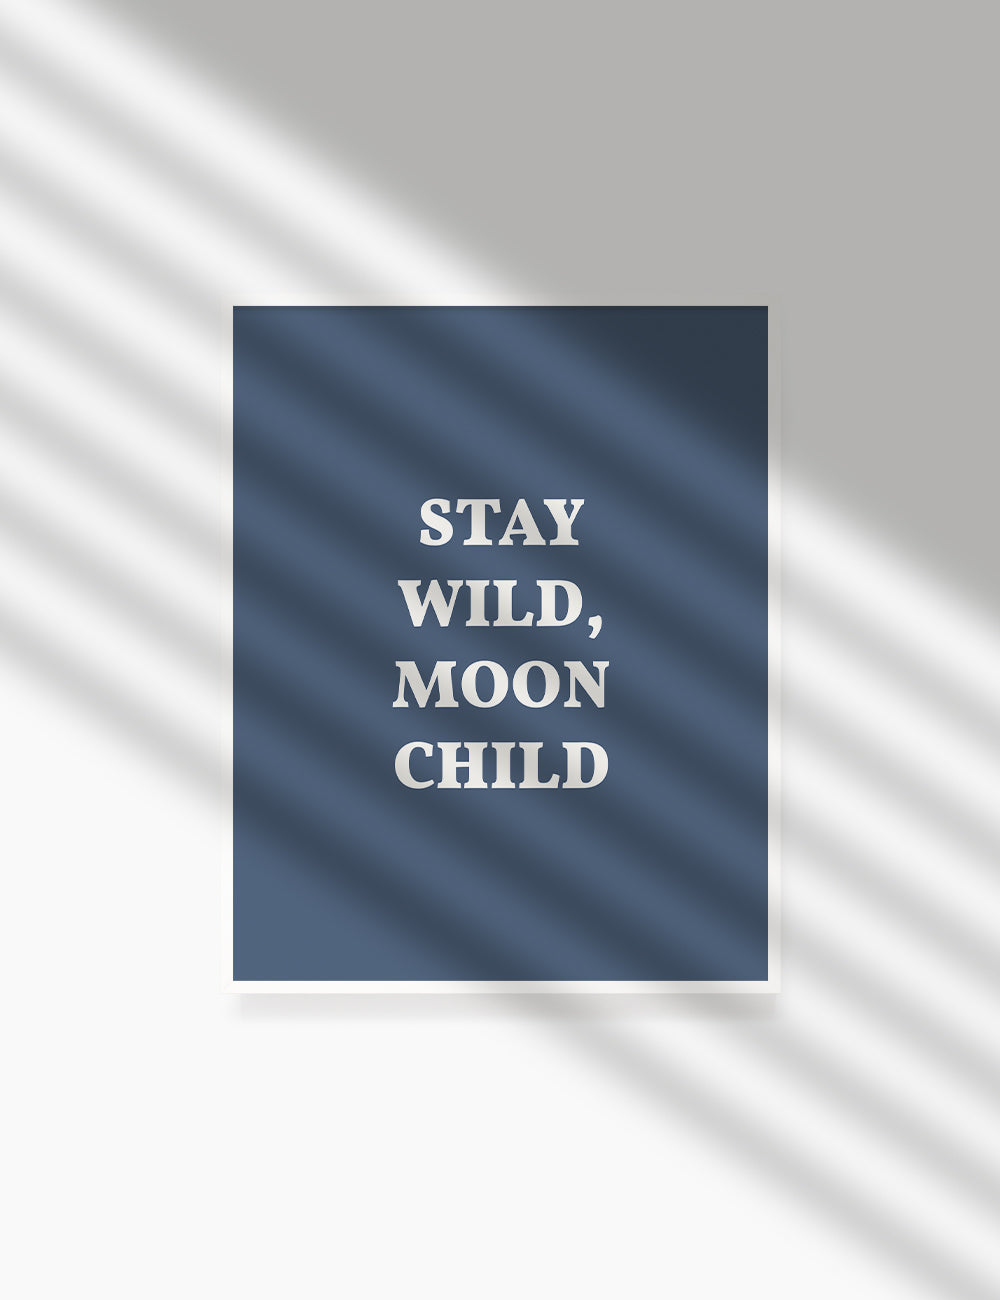 STAY, WILD, MOON CHILD. Moonchild Quote. Blue. Printable Wall Art Quote. - PAPER MOON Art & Design